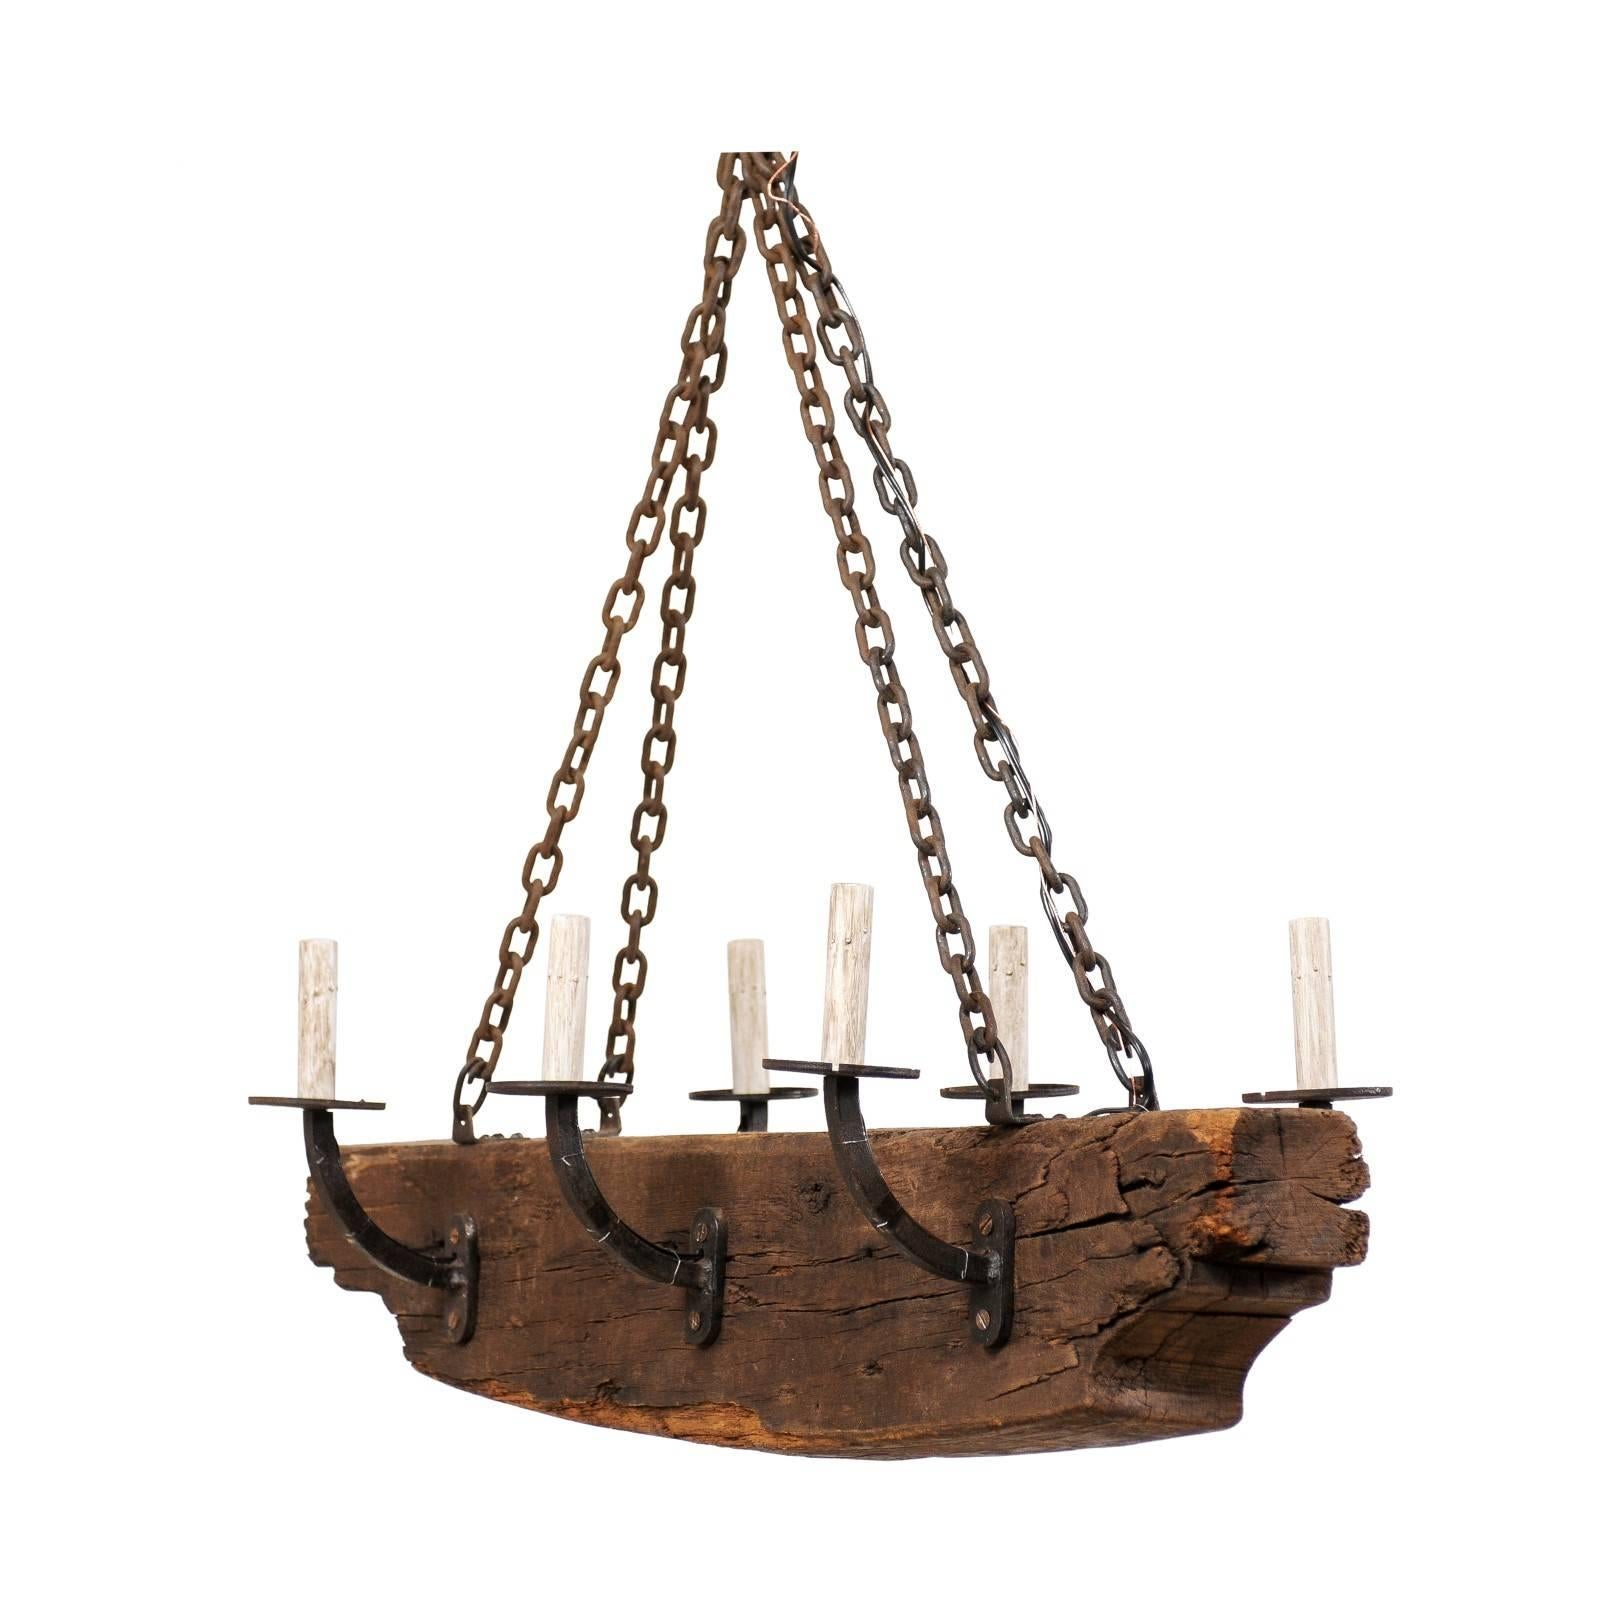 French Rustic Wood Beam Chandelier with Six Forged Iron Arms, Mid 20th C.